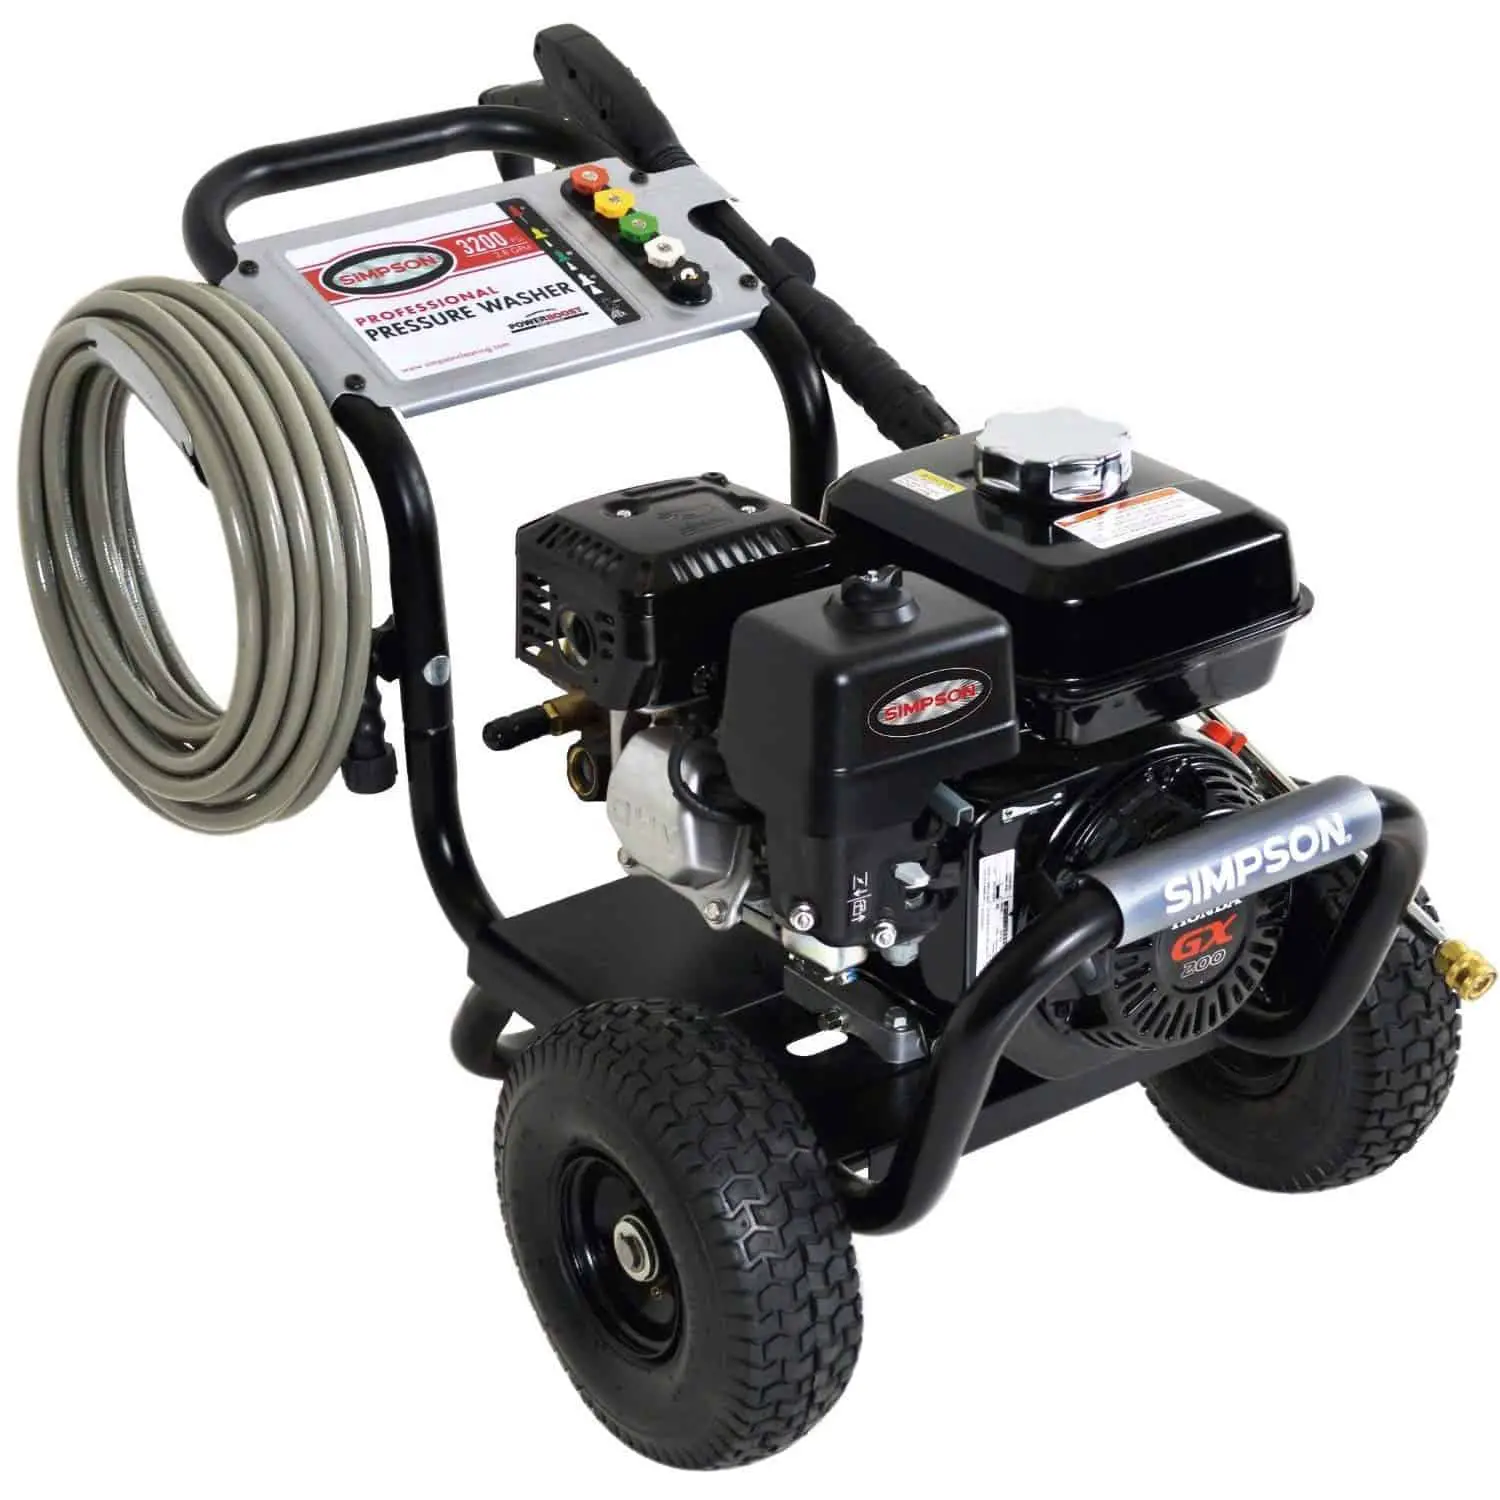 Simpson Cleaning PS3228-S 3300 PSI Gas Pressure Washer